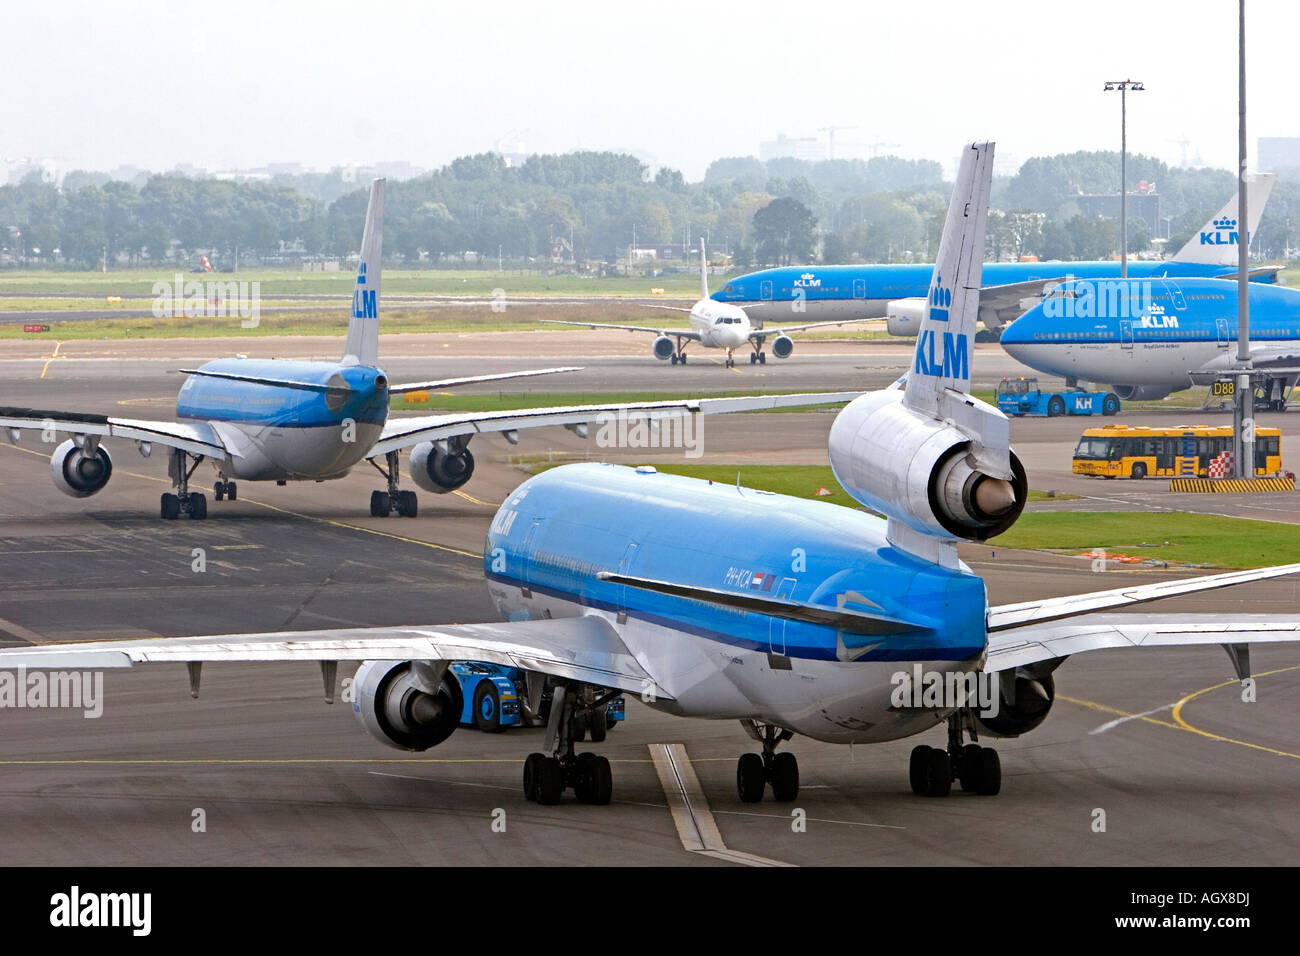 KLM airplanes at the Schiphol Airport in Amsterdam Netherlands Stock Photo